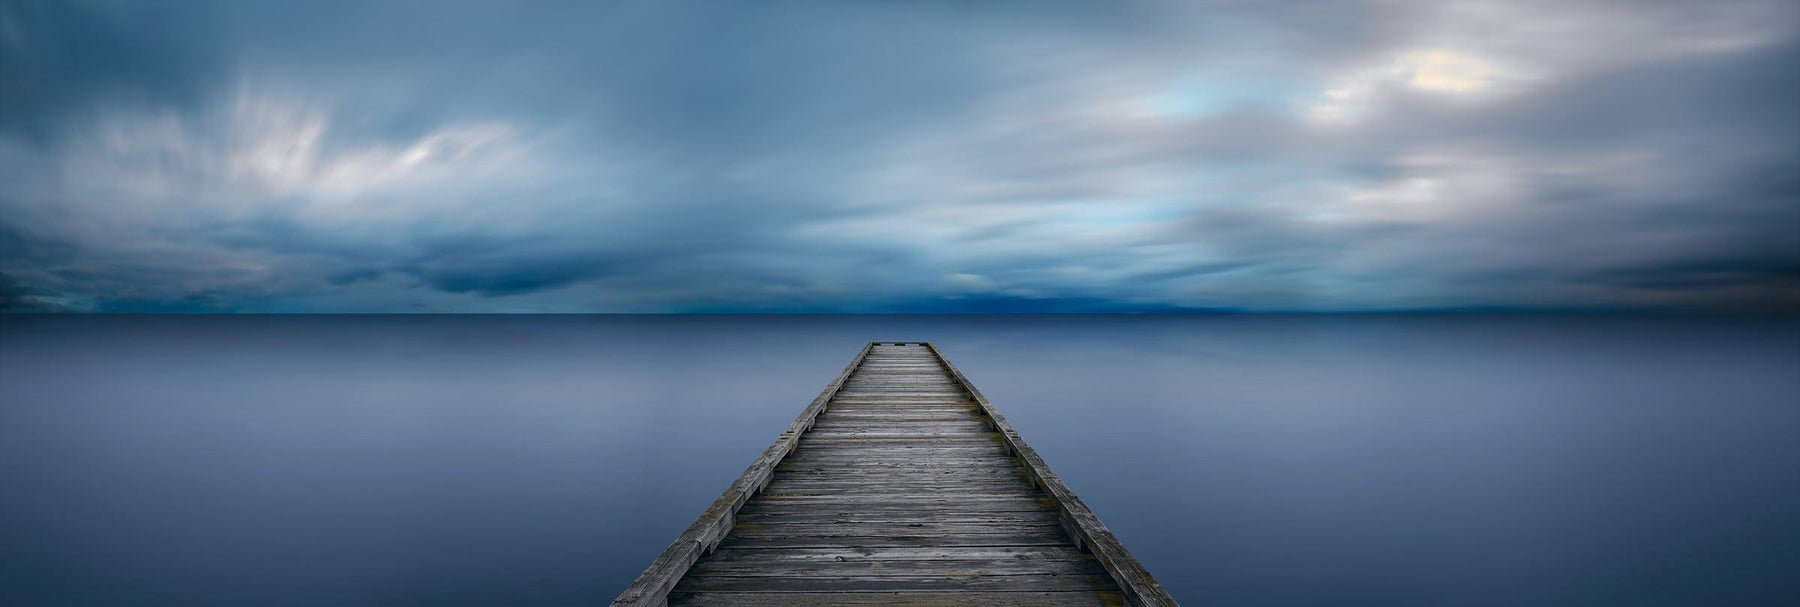 Old wood jetty stretching out over a calm lake in Seattle Washington